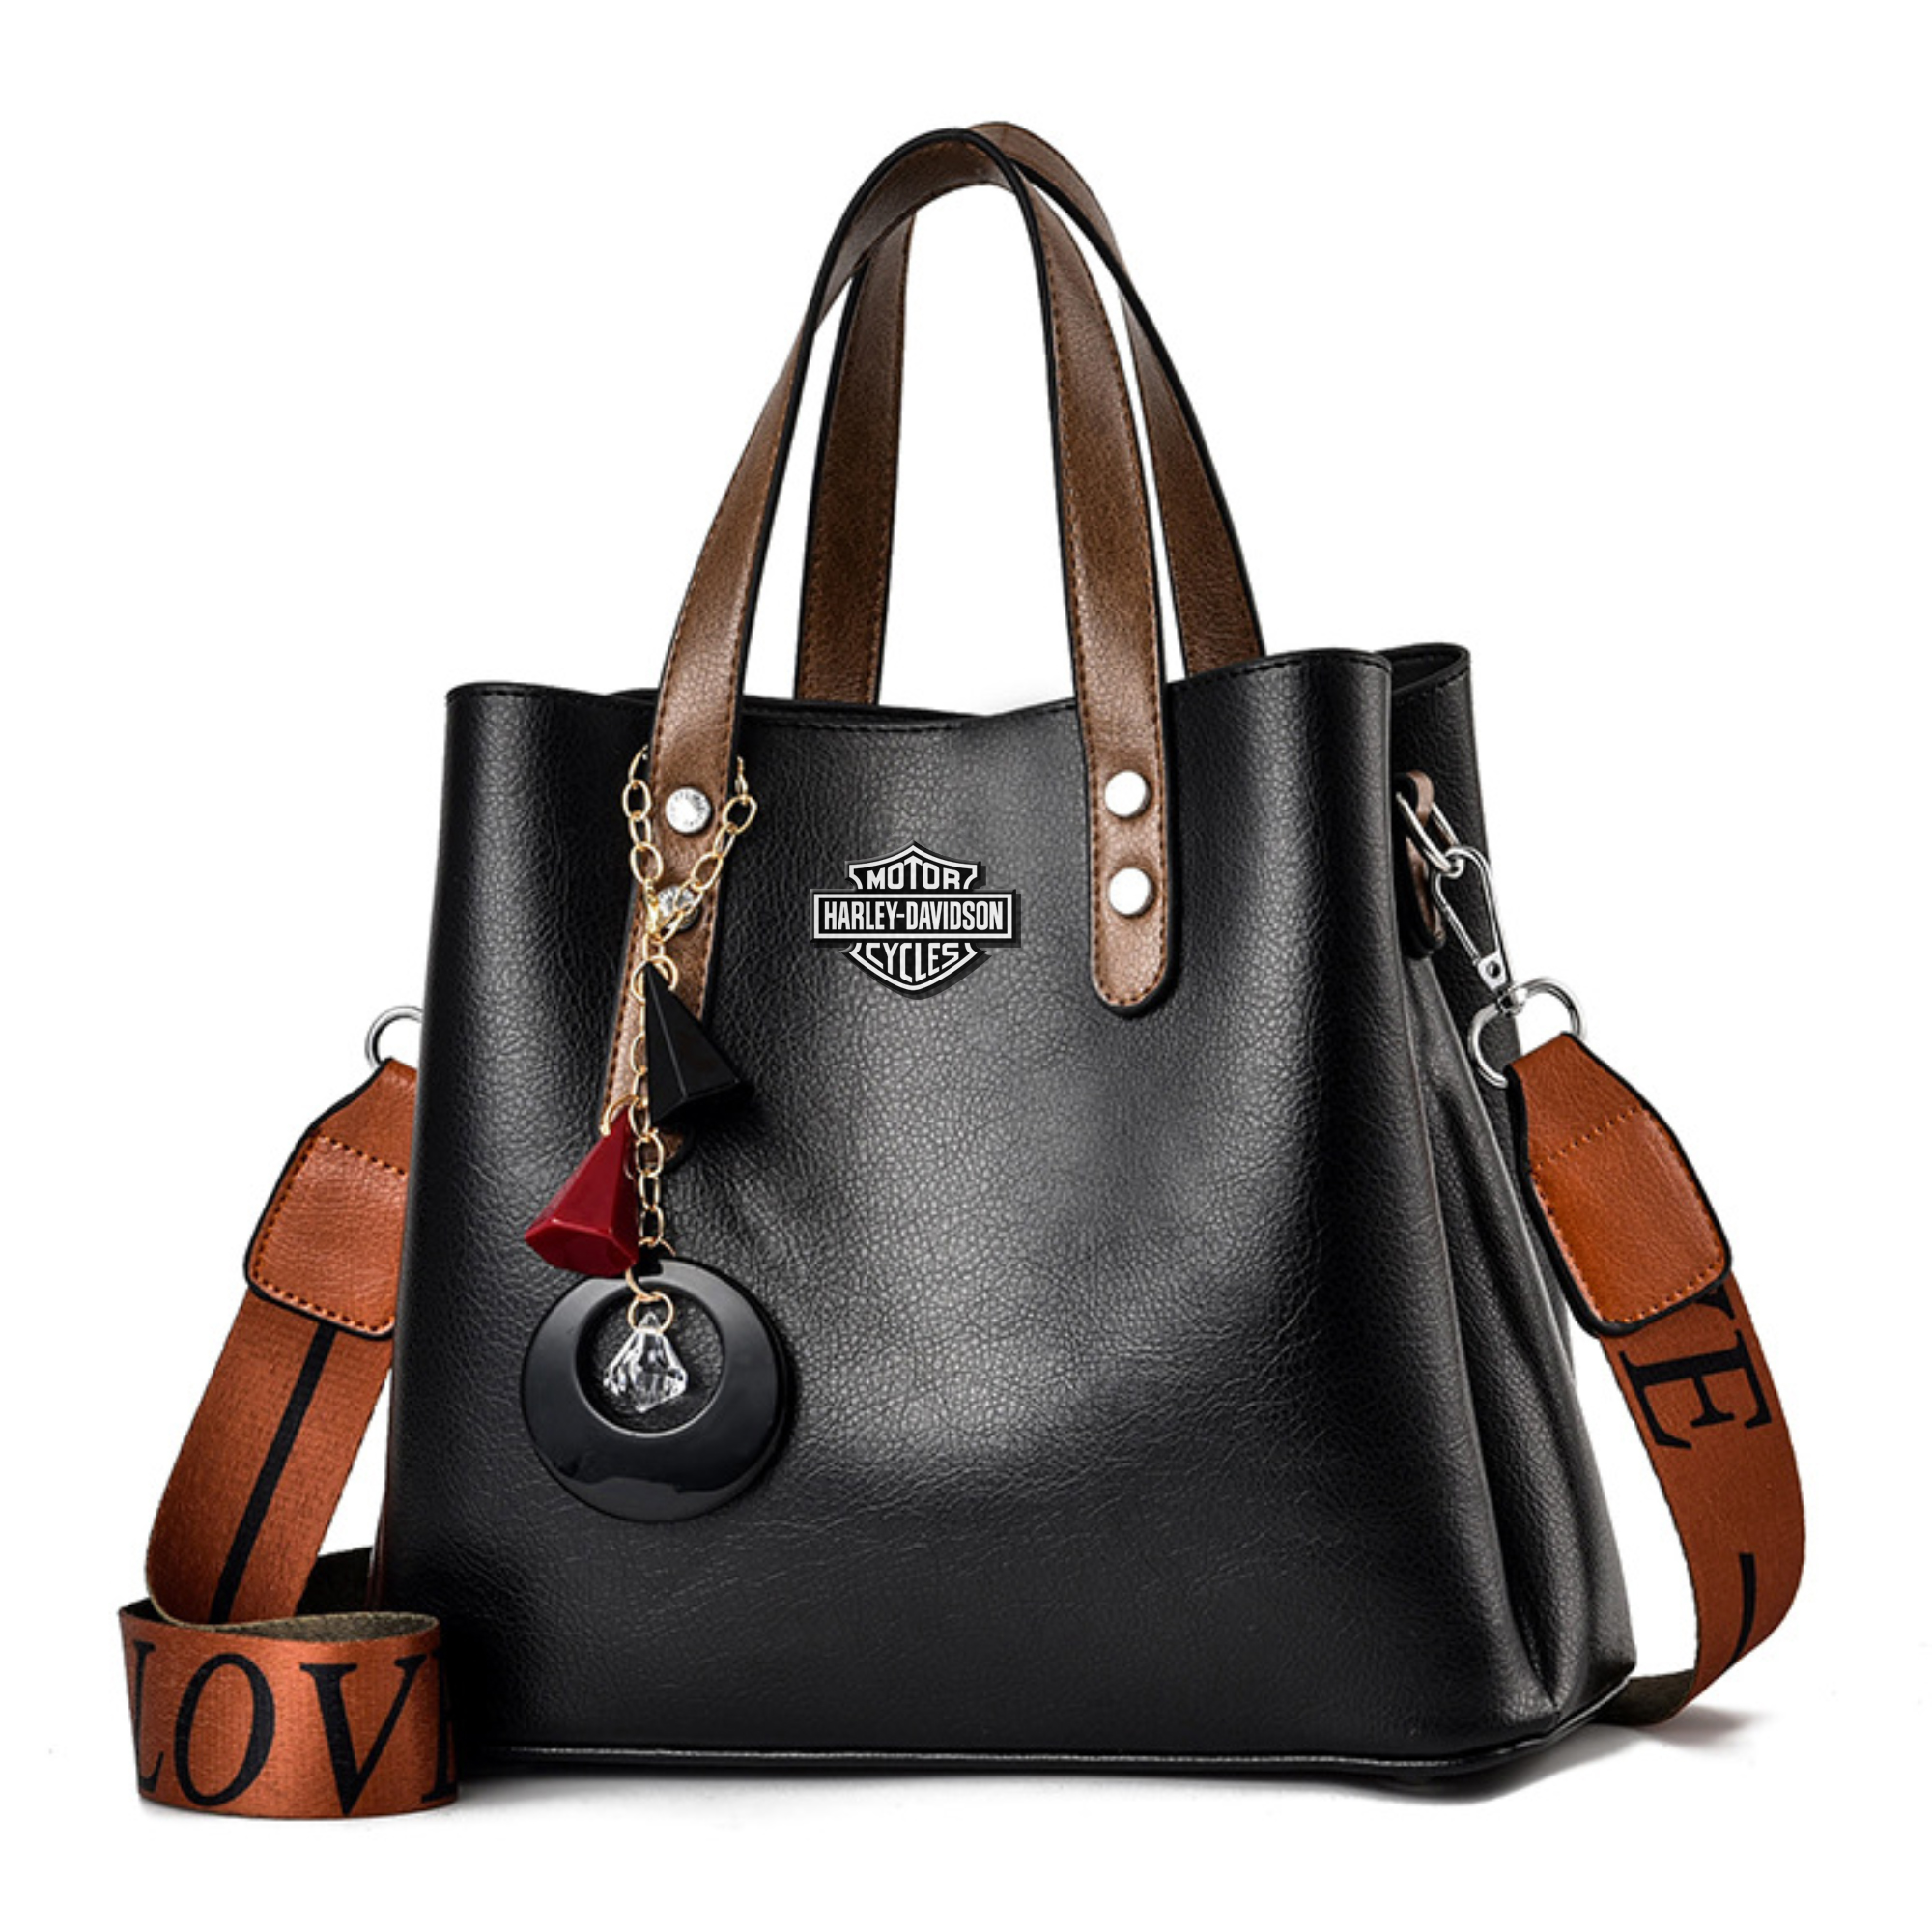 LEATHER HARLEY DAVIDSON PURSES - clothing & accessories - by owner -  apparel sale - craigslist